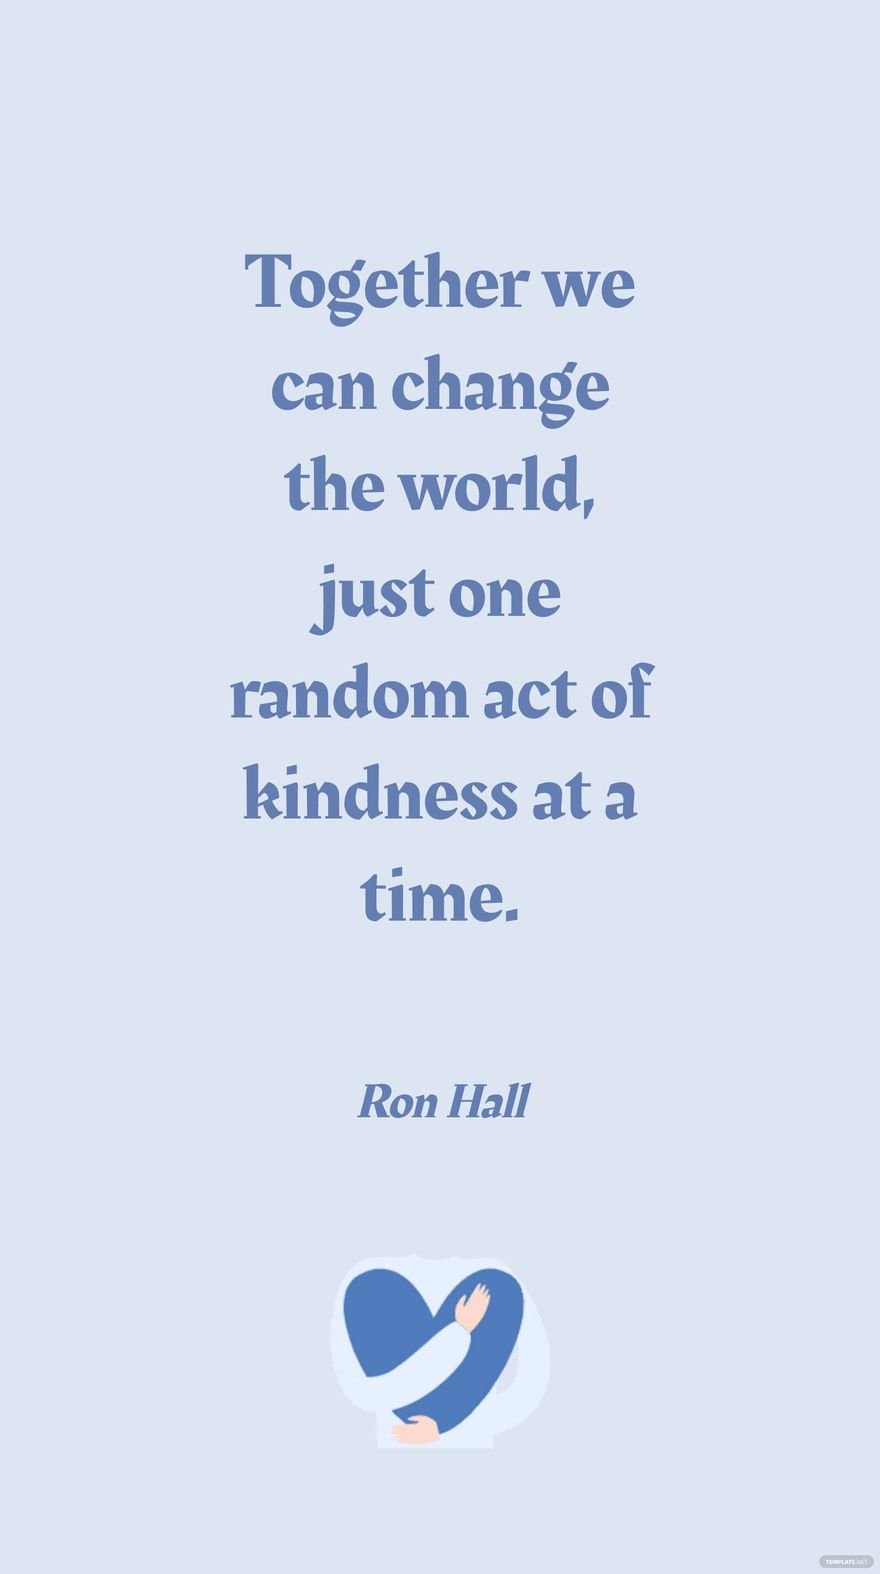 Ron Hall - Together we can change the world, just one random act of kindness at a time.